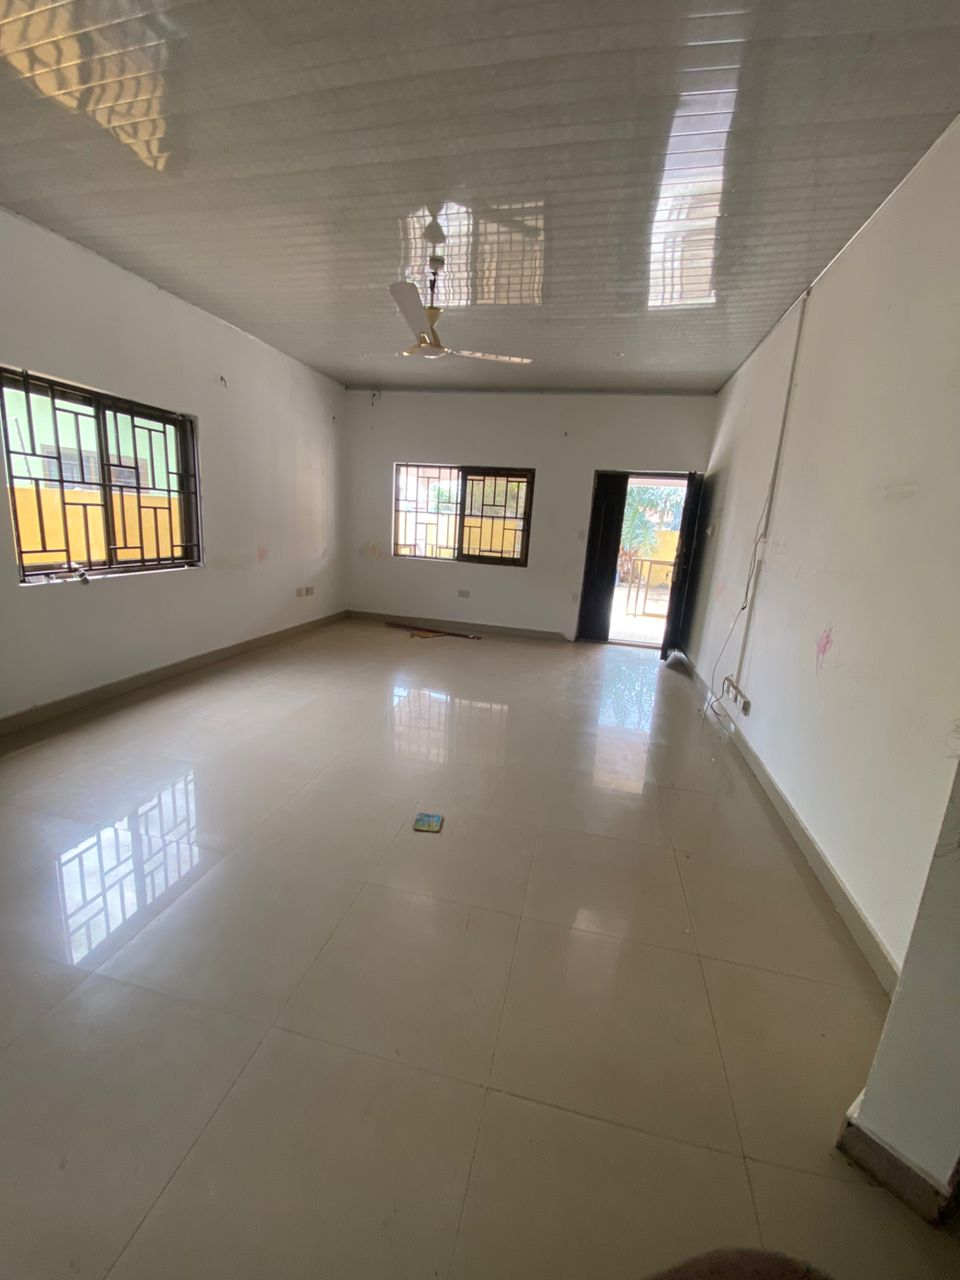 Three (3) Bedrooms House for Rent at Spintex